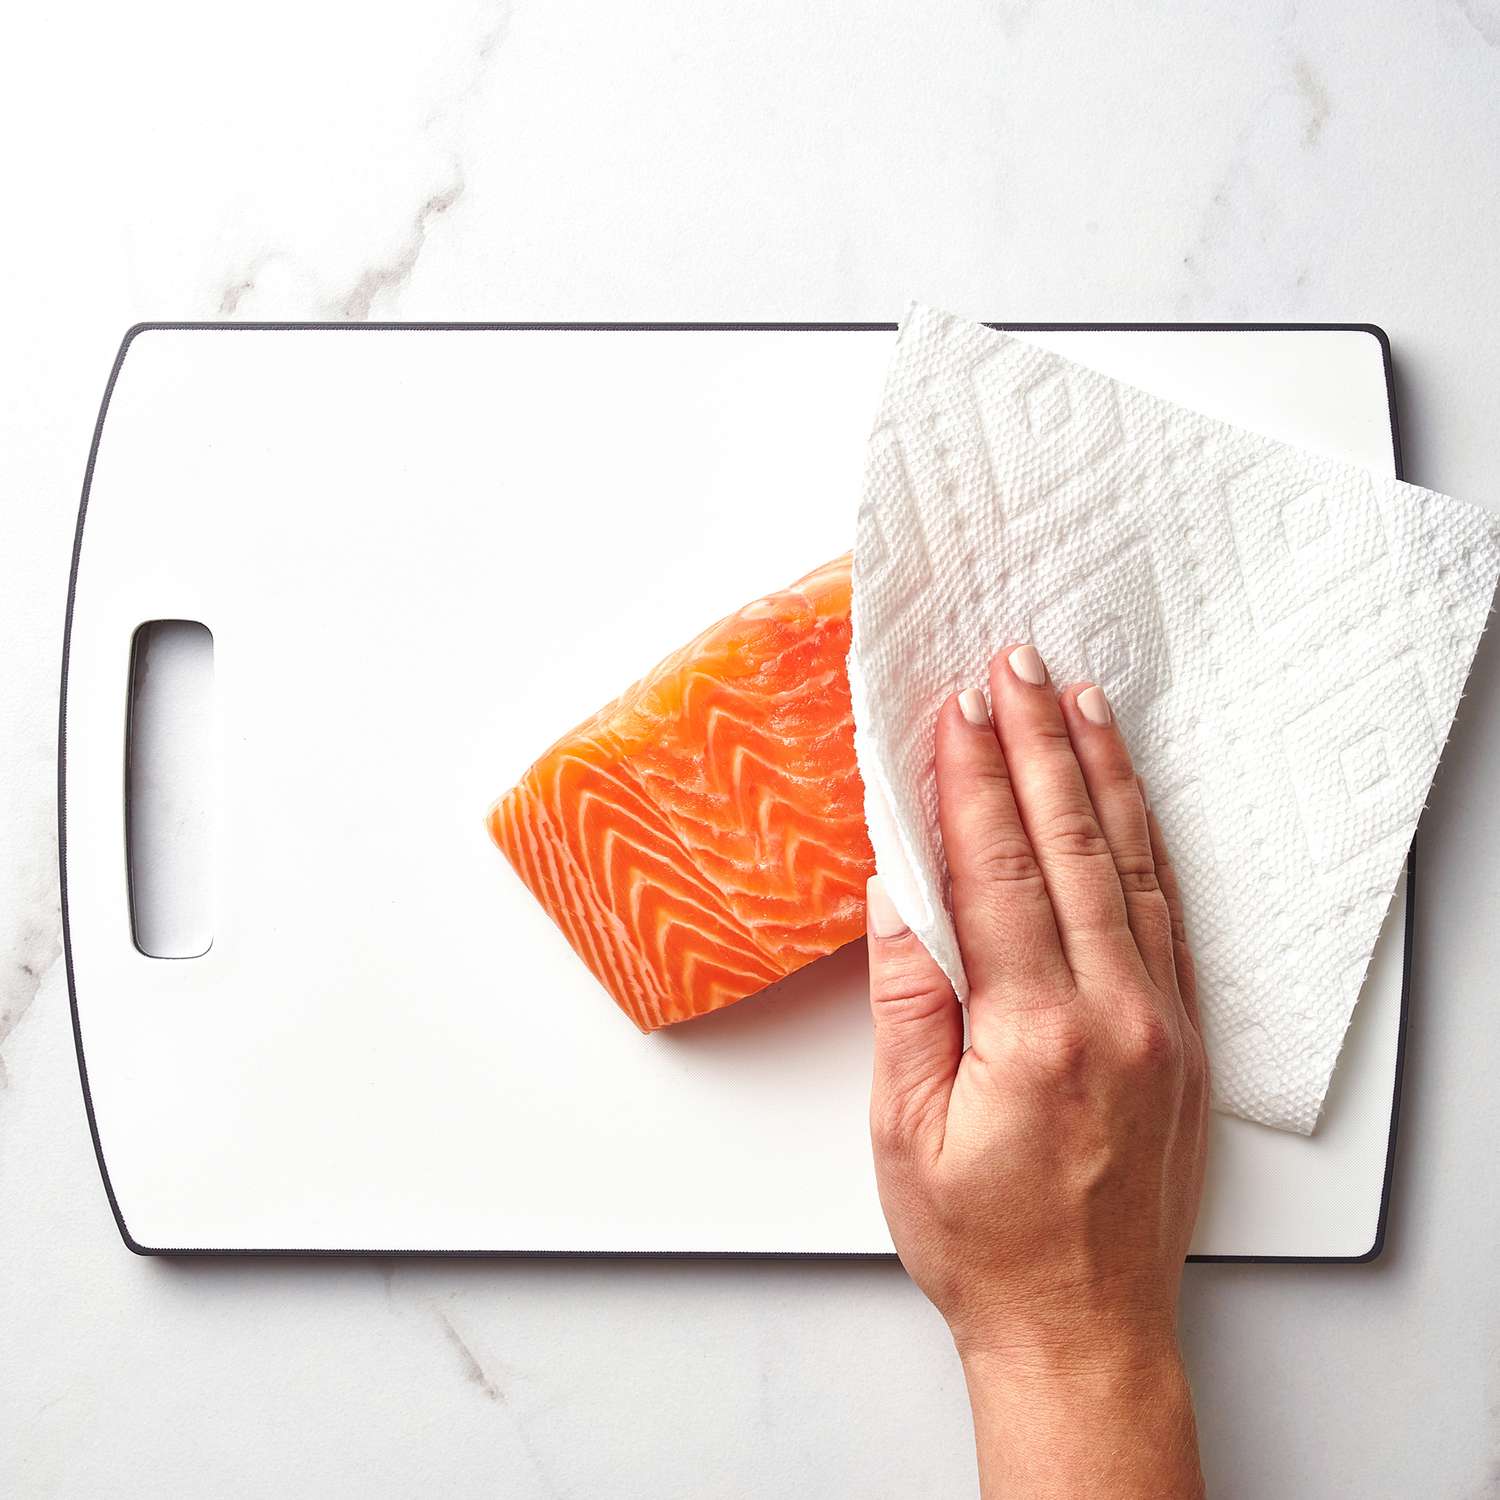 A hand patting down a piece of salmon with a paper towel